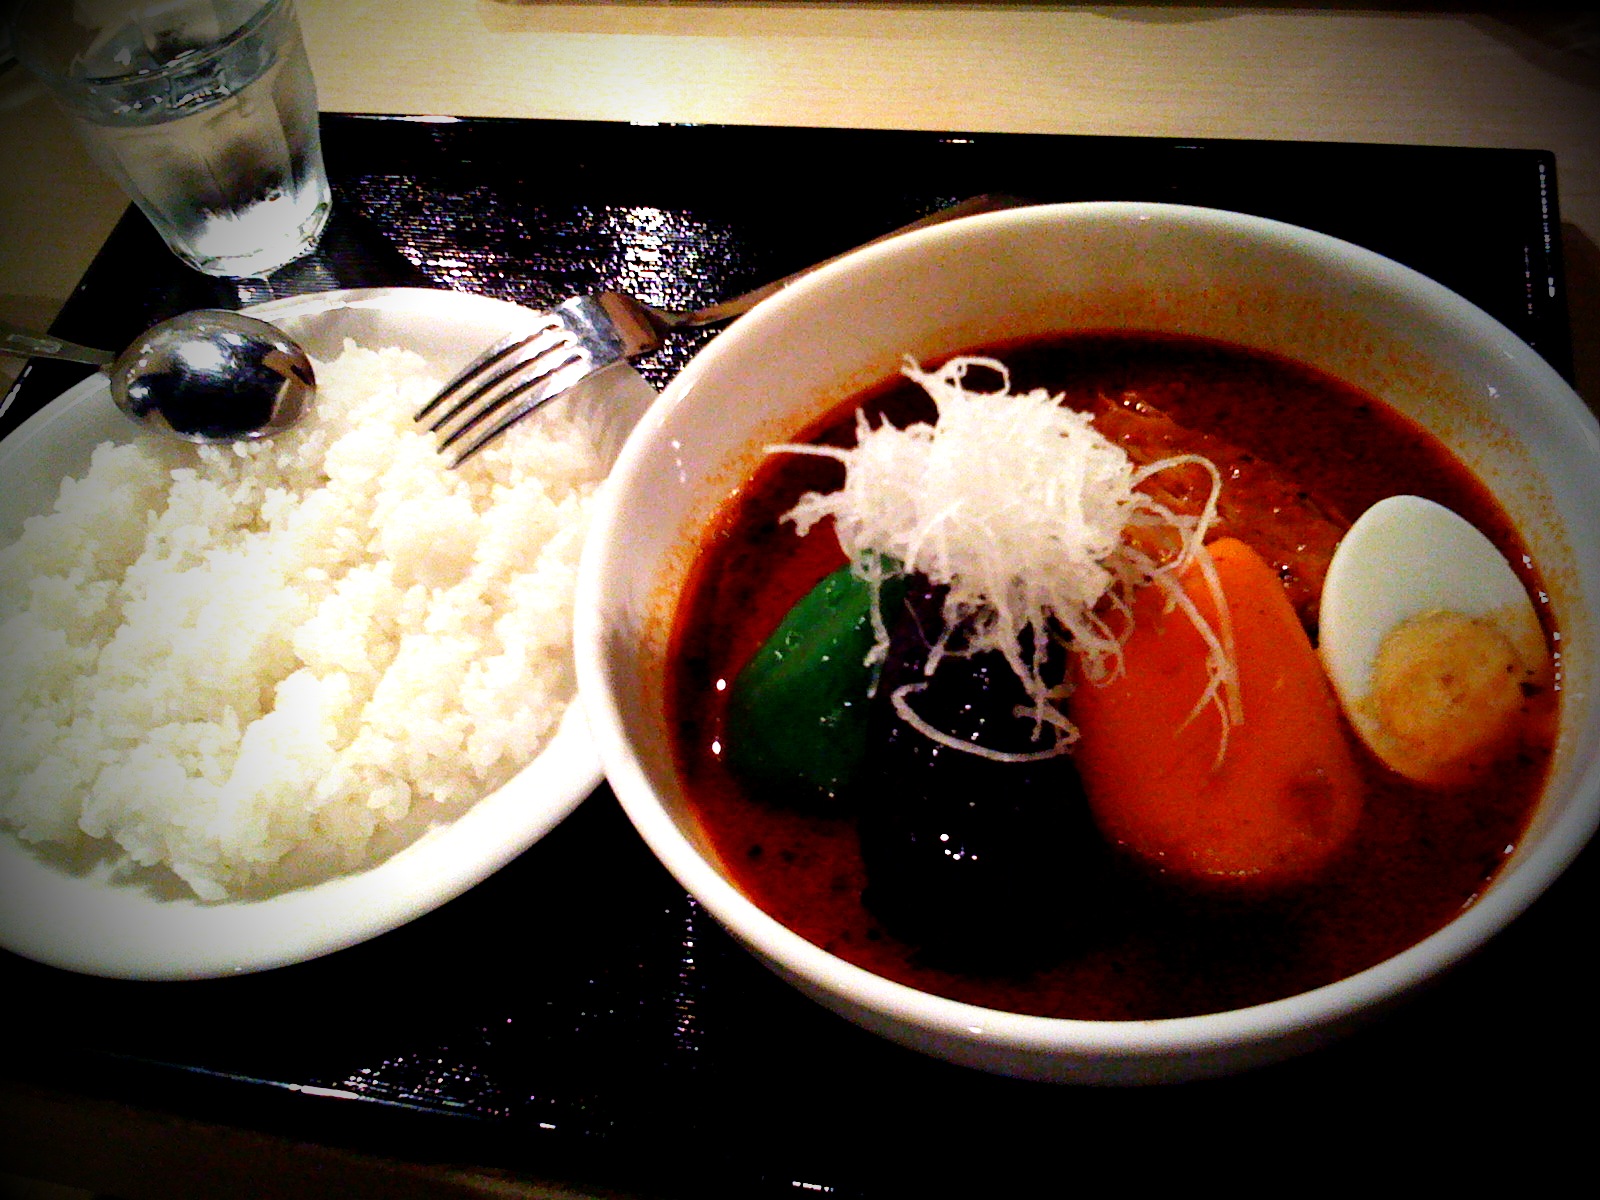 a plate with soup and rice and an egg on the side